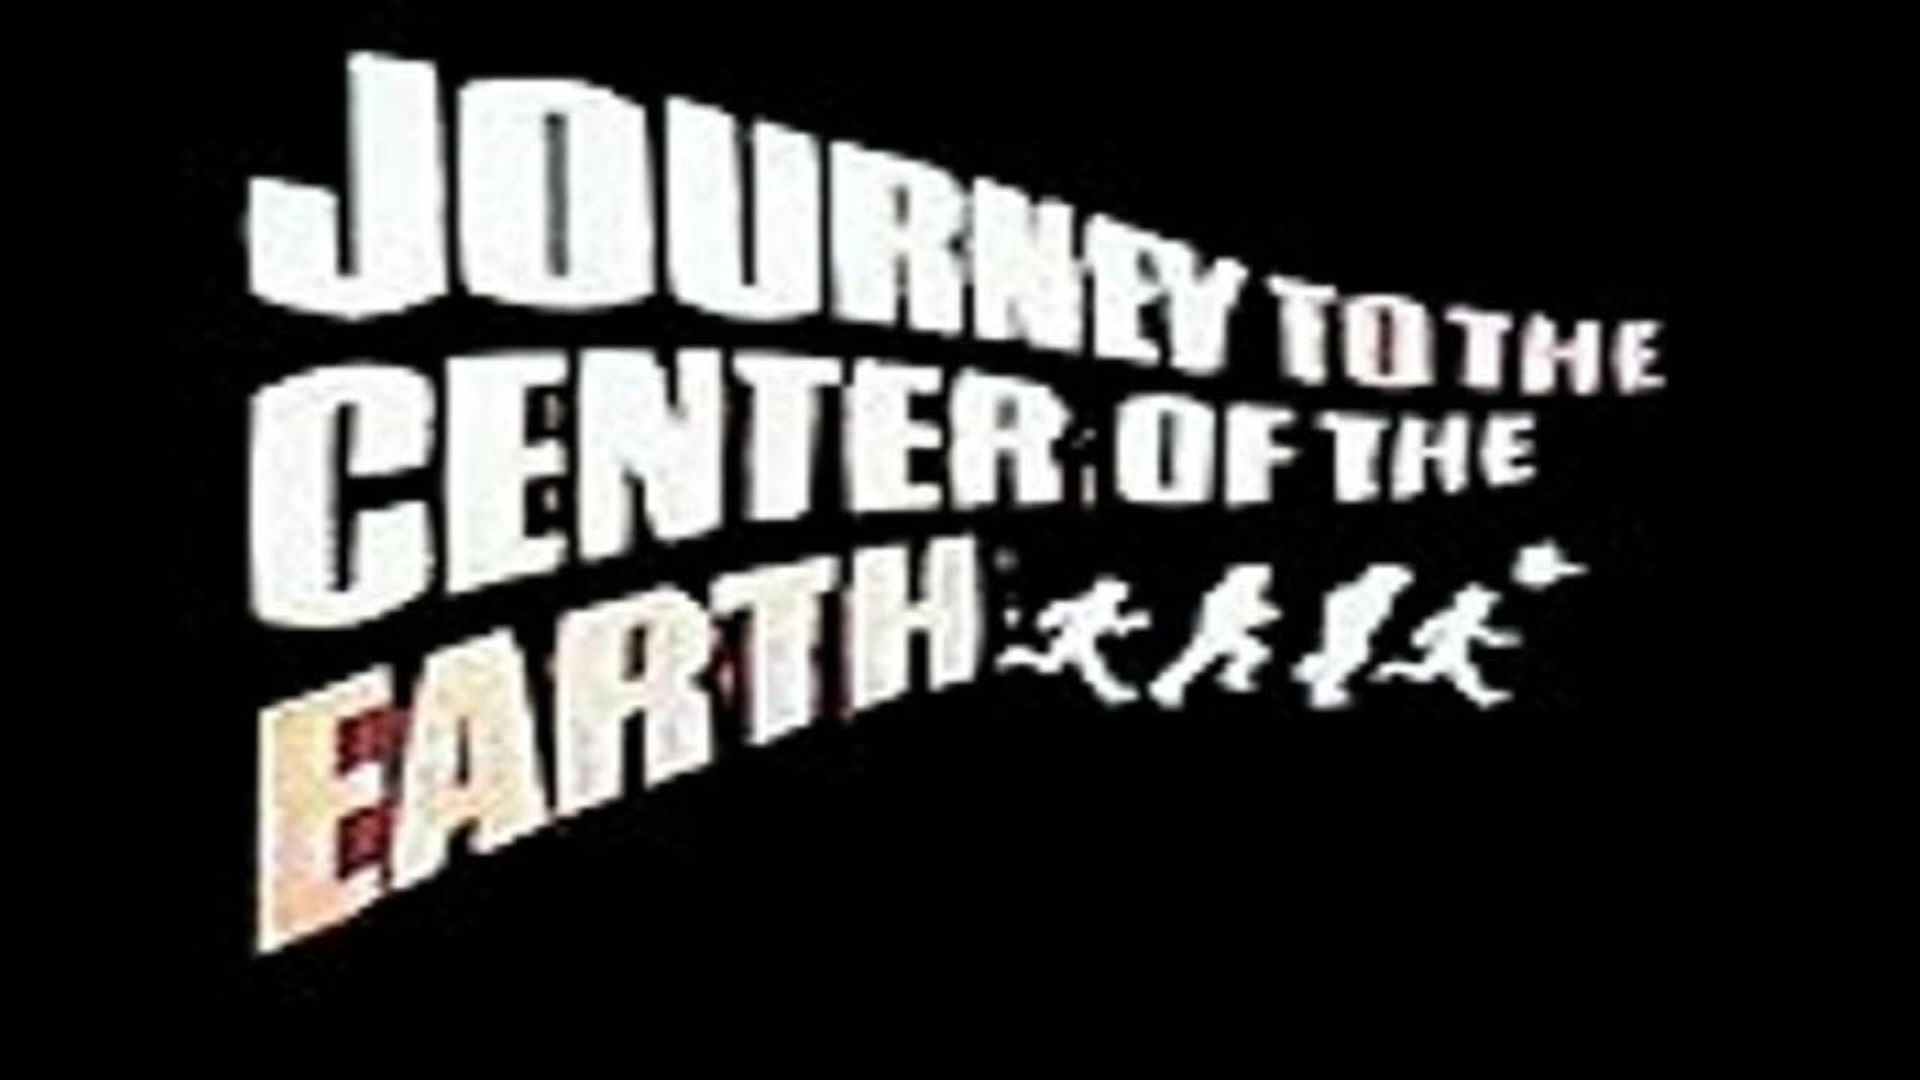 Journey to the Center of the Earth background